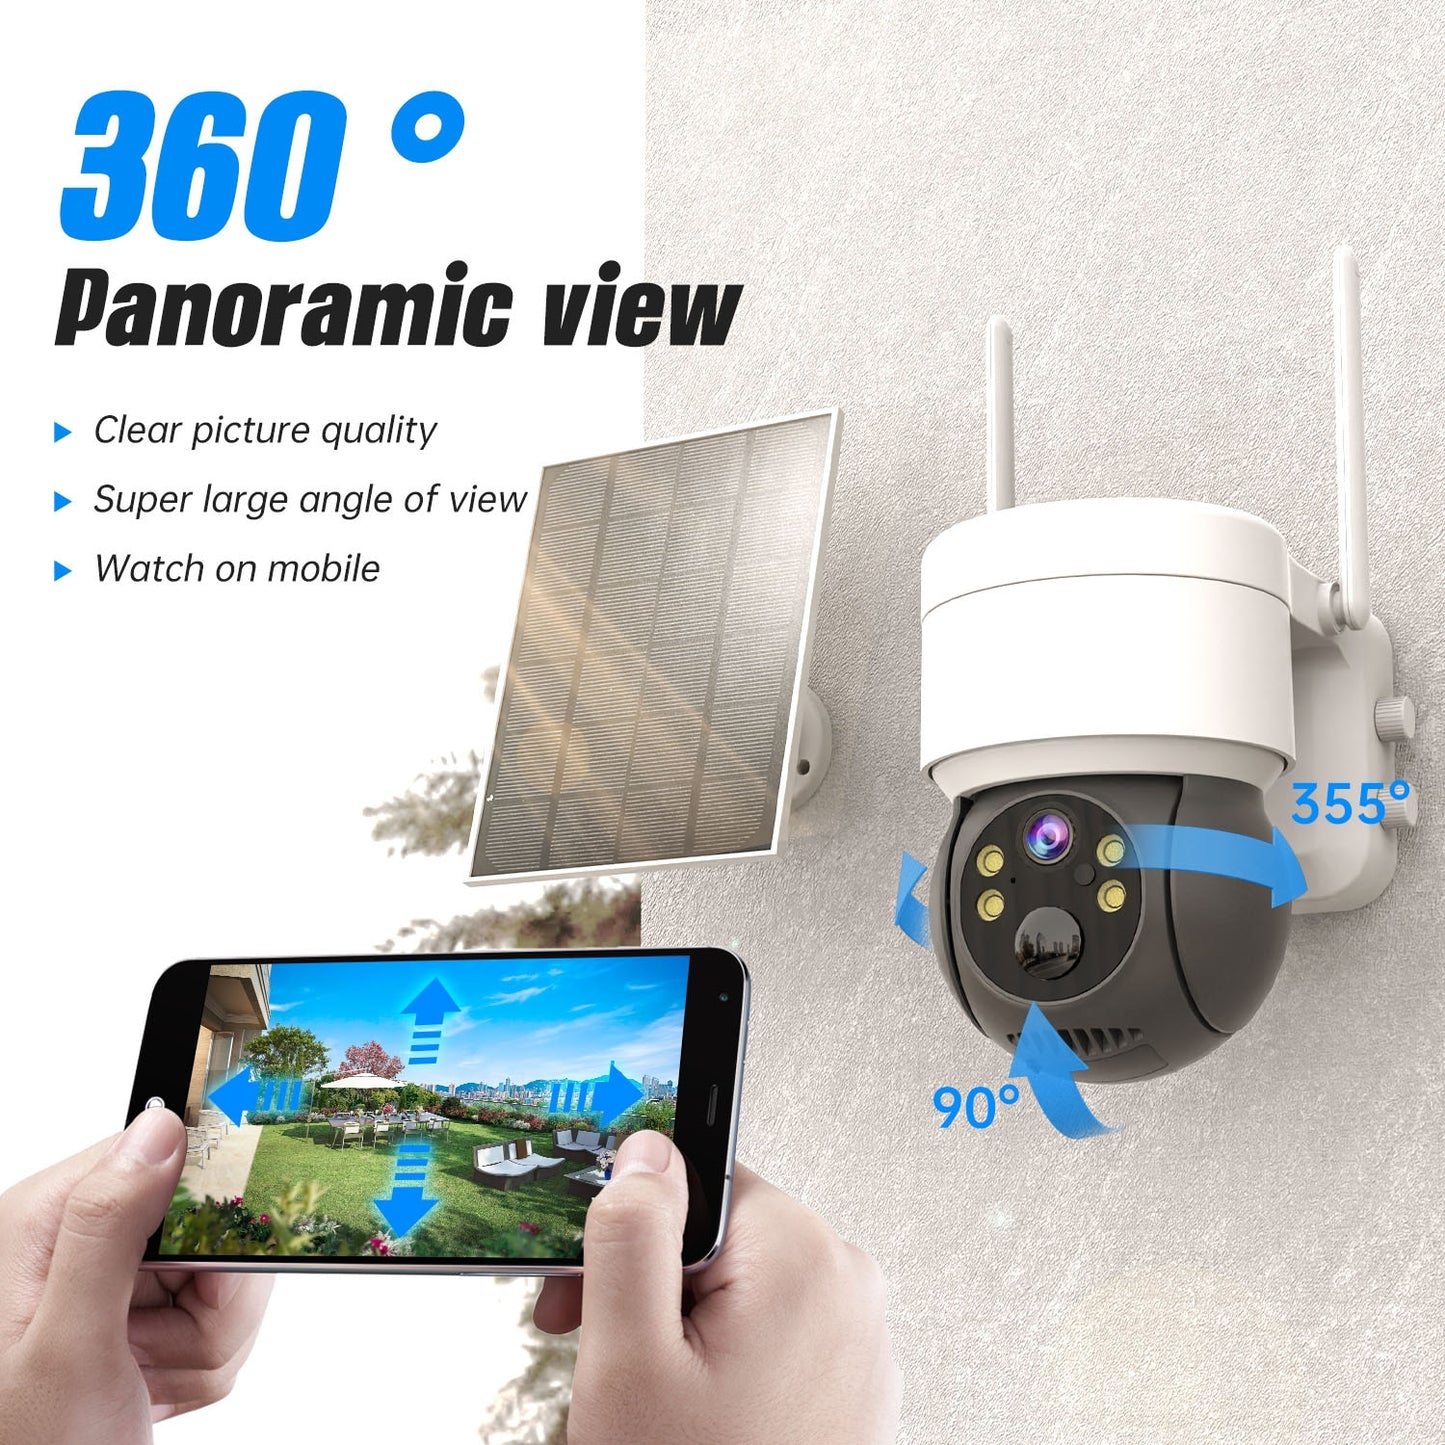 360 0 panoramic view Clear picture quality Watch on mobile 3550 90